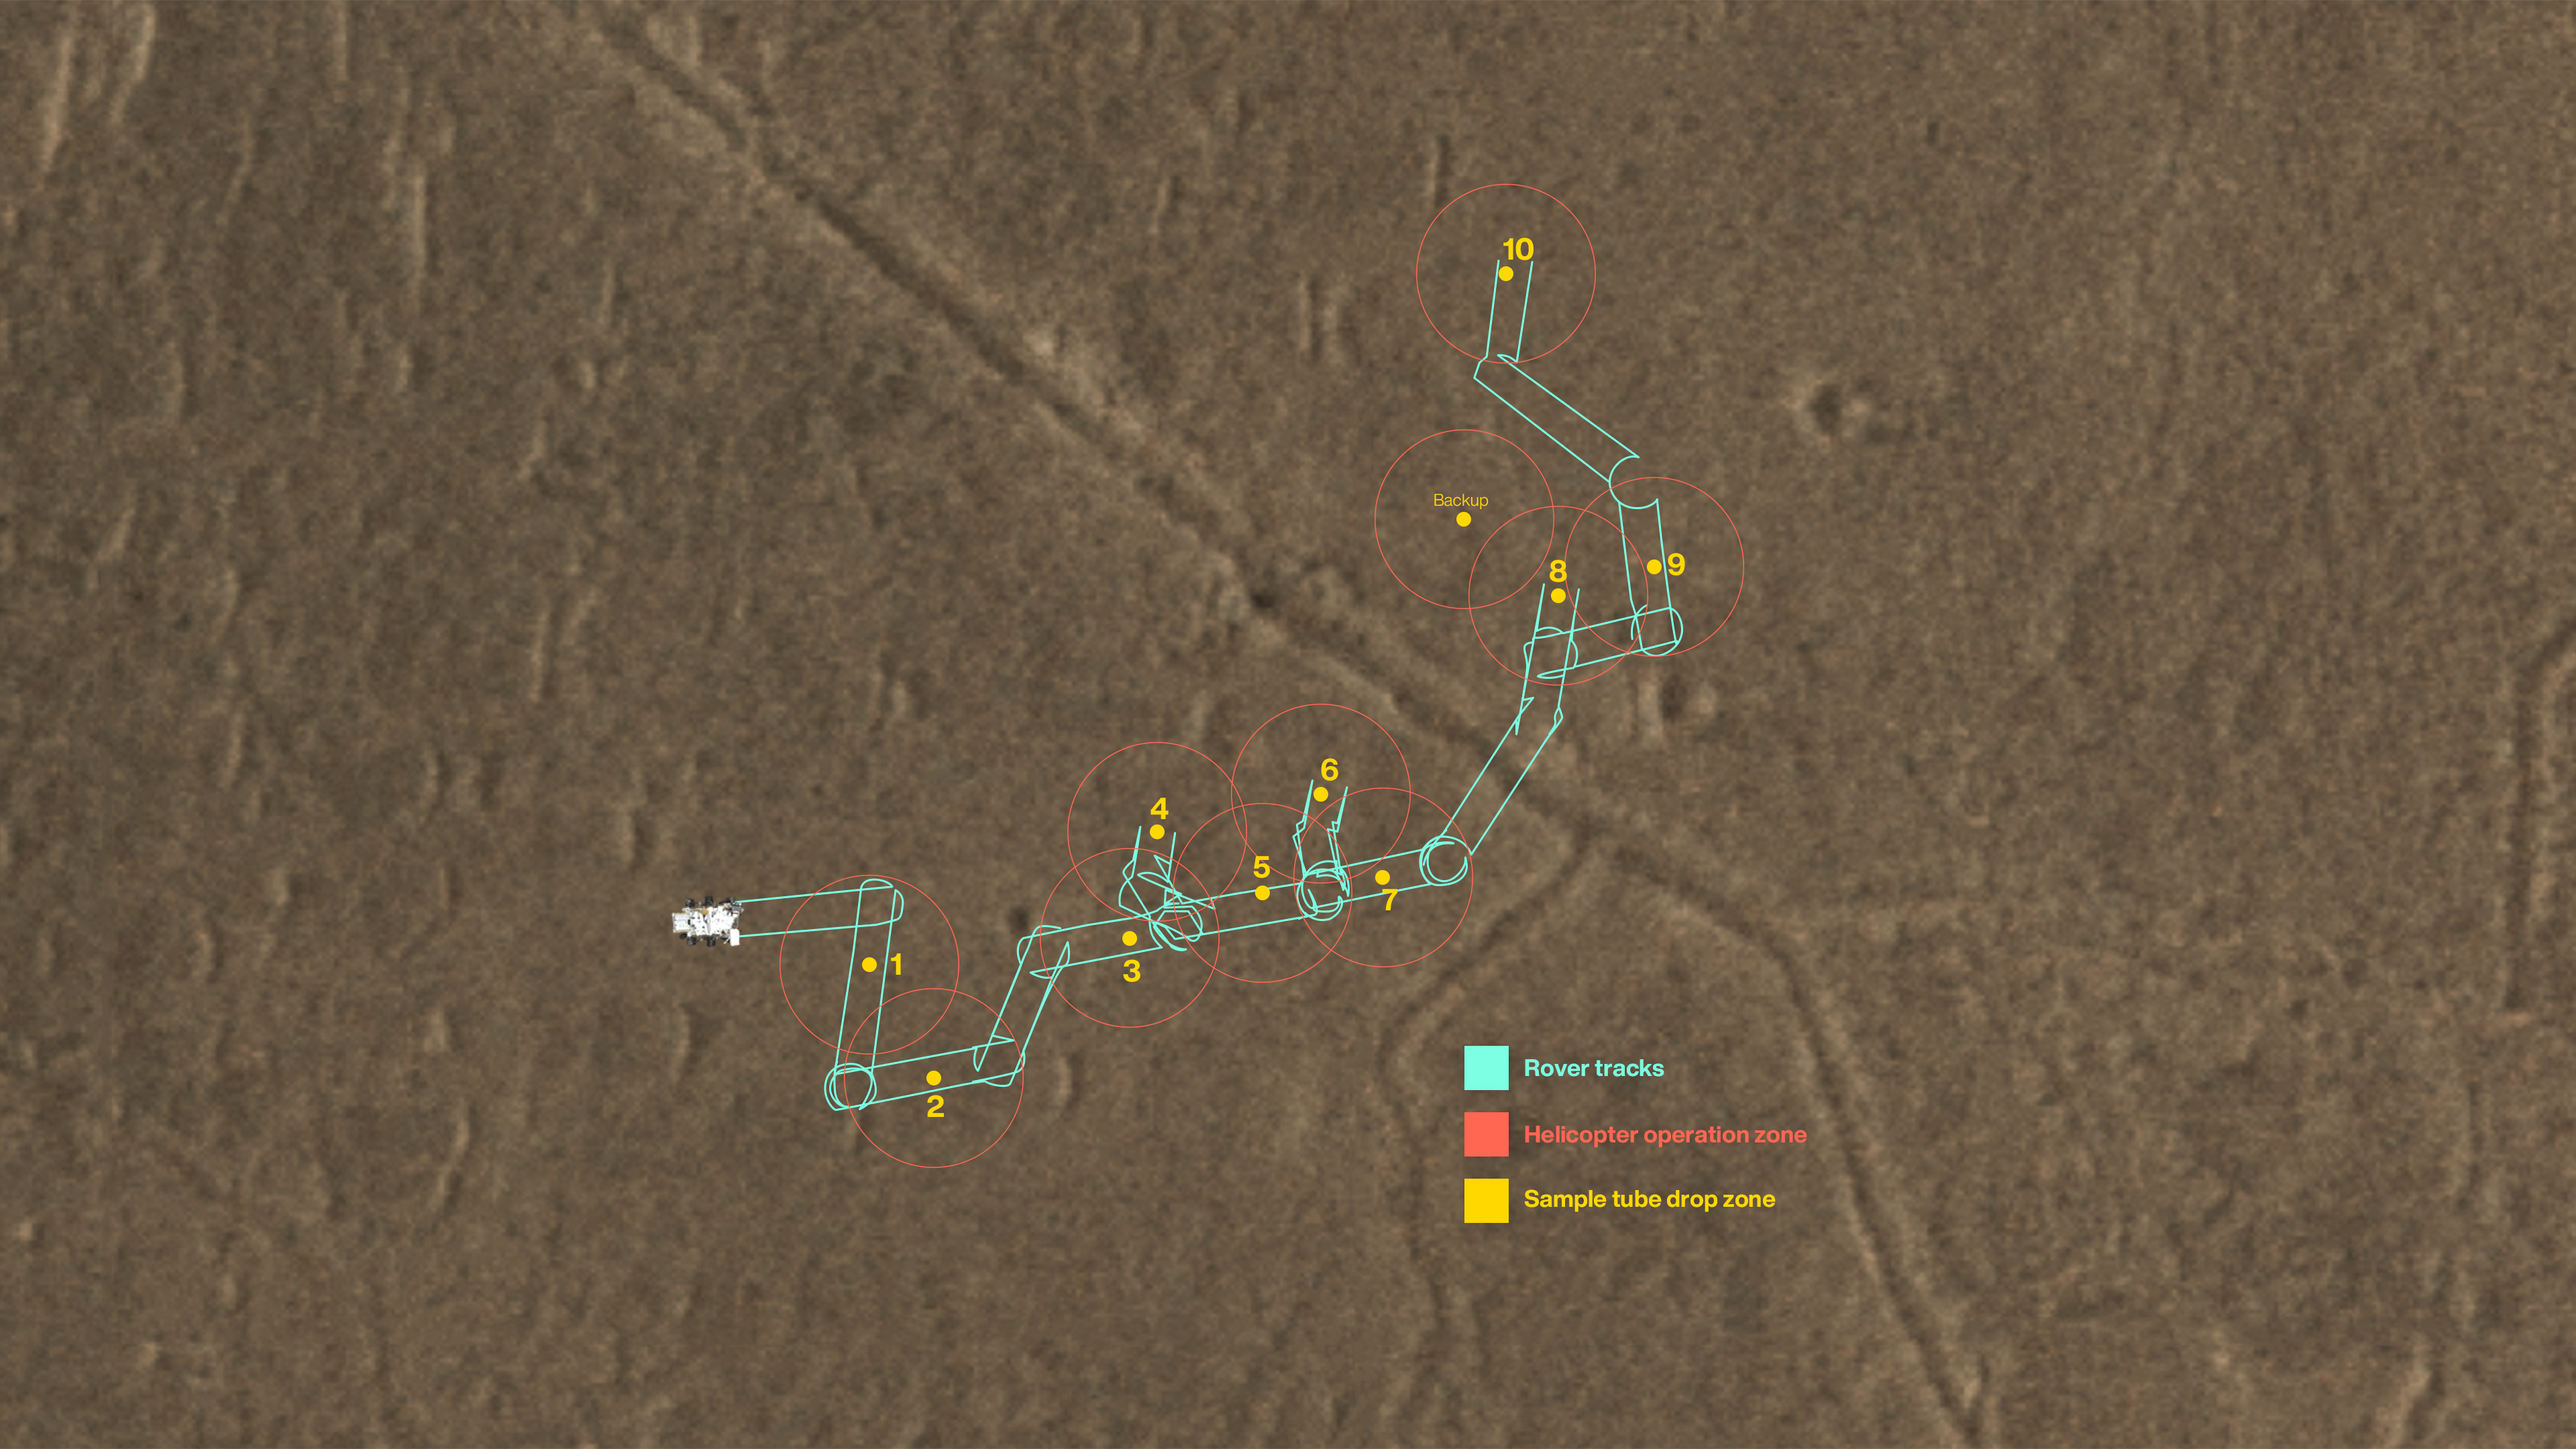 This map shows where NASA’s Perseverance Mars rover will be dropping 10 samples that a future mission could pick up. The orange circles represent areas where a Sample Recovery Helicopter could safely operate to acquire the sample tubes.